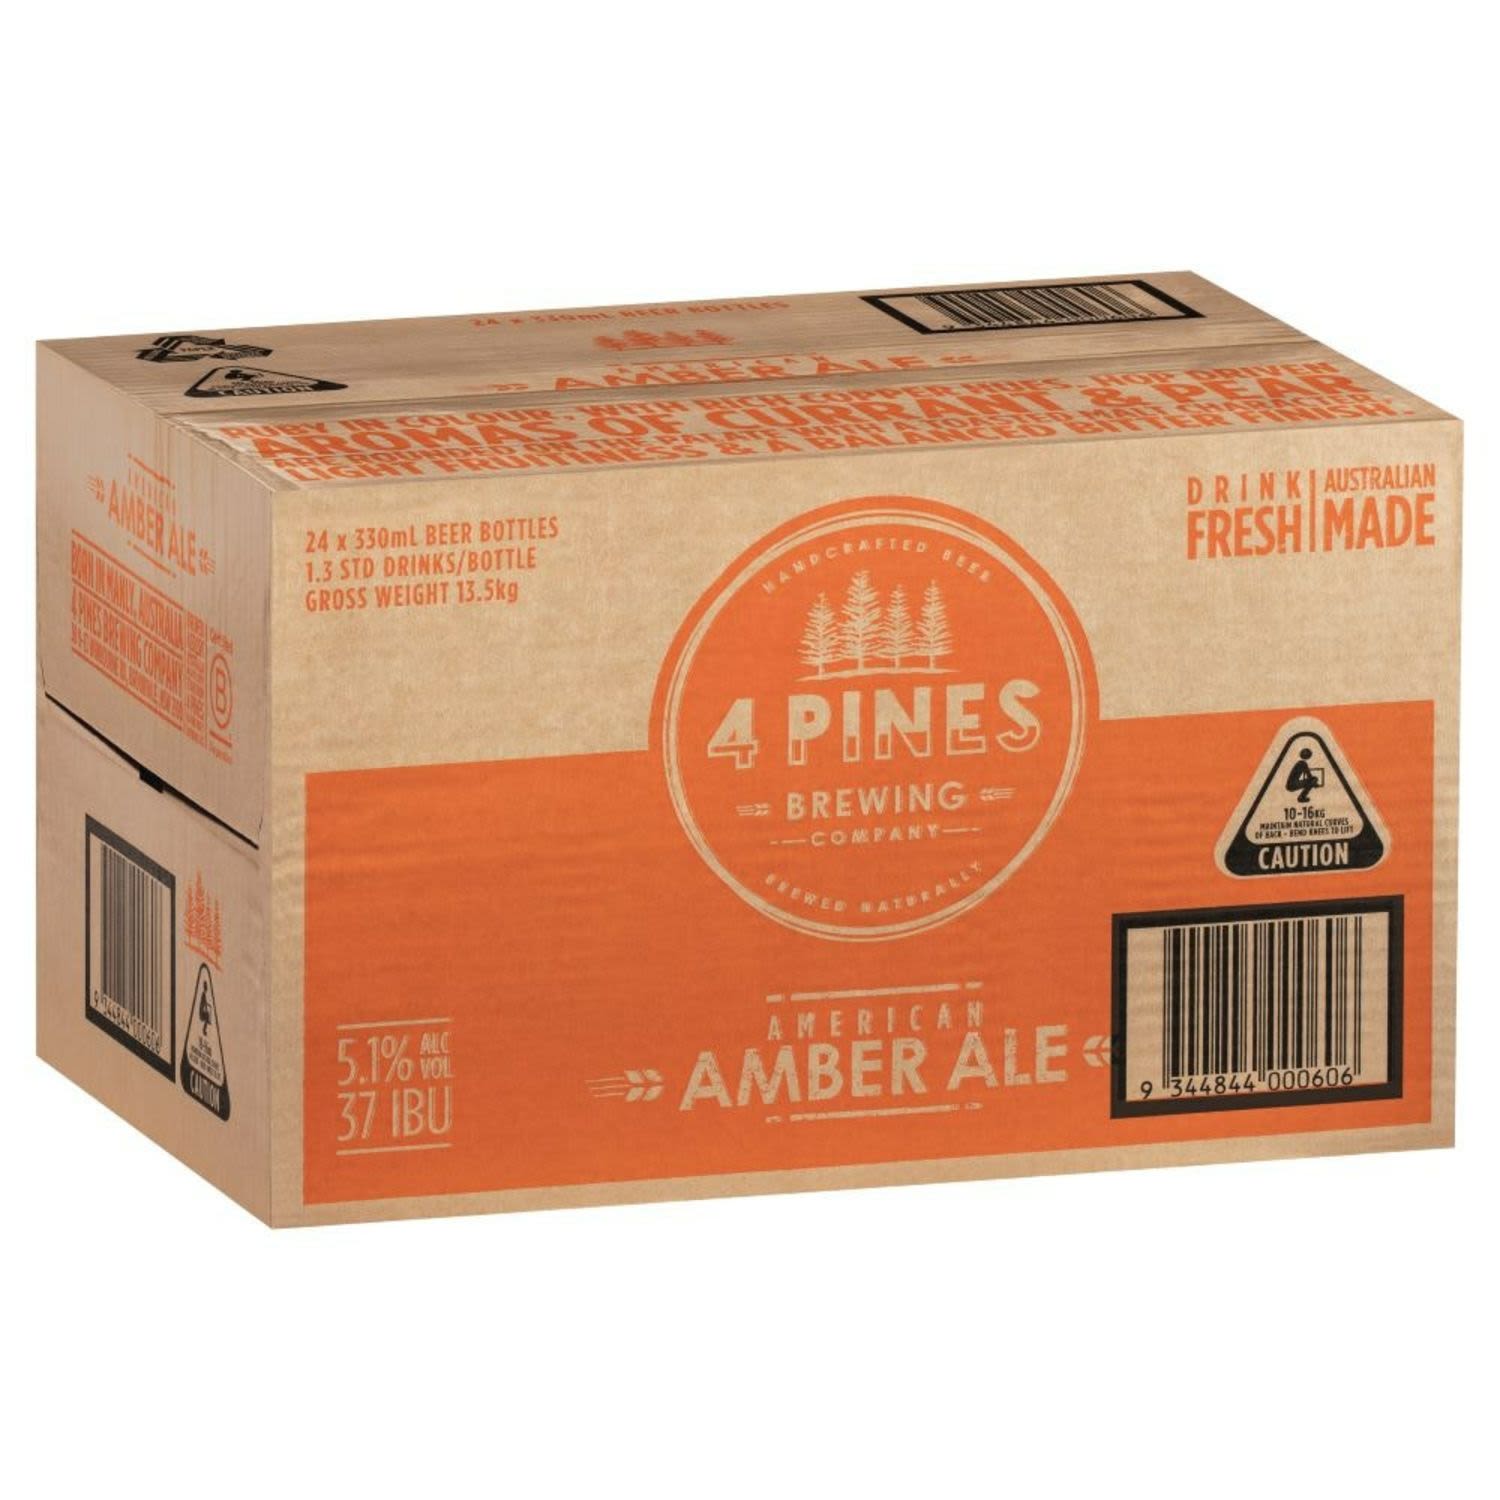 4 Pines American Amber Ale Bottle 330mL 24 Pack